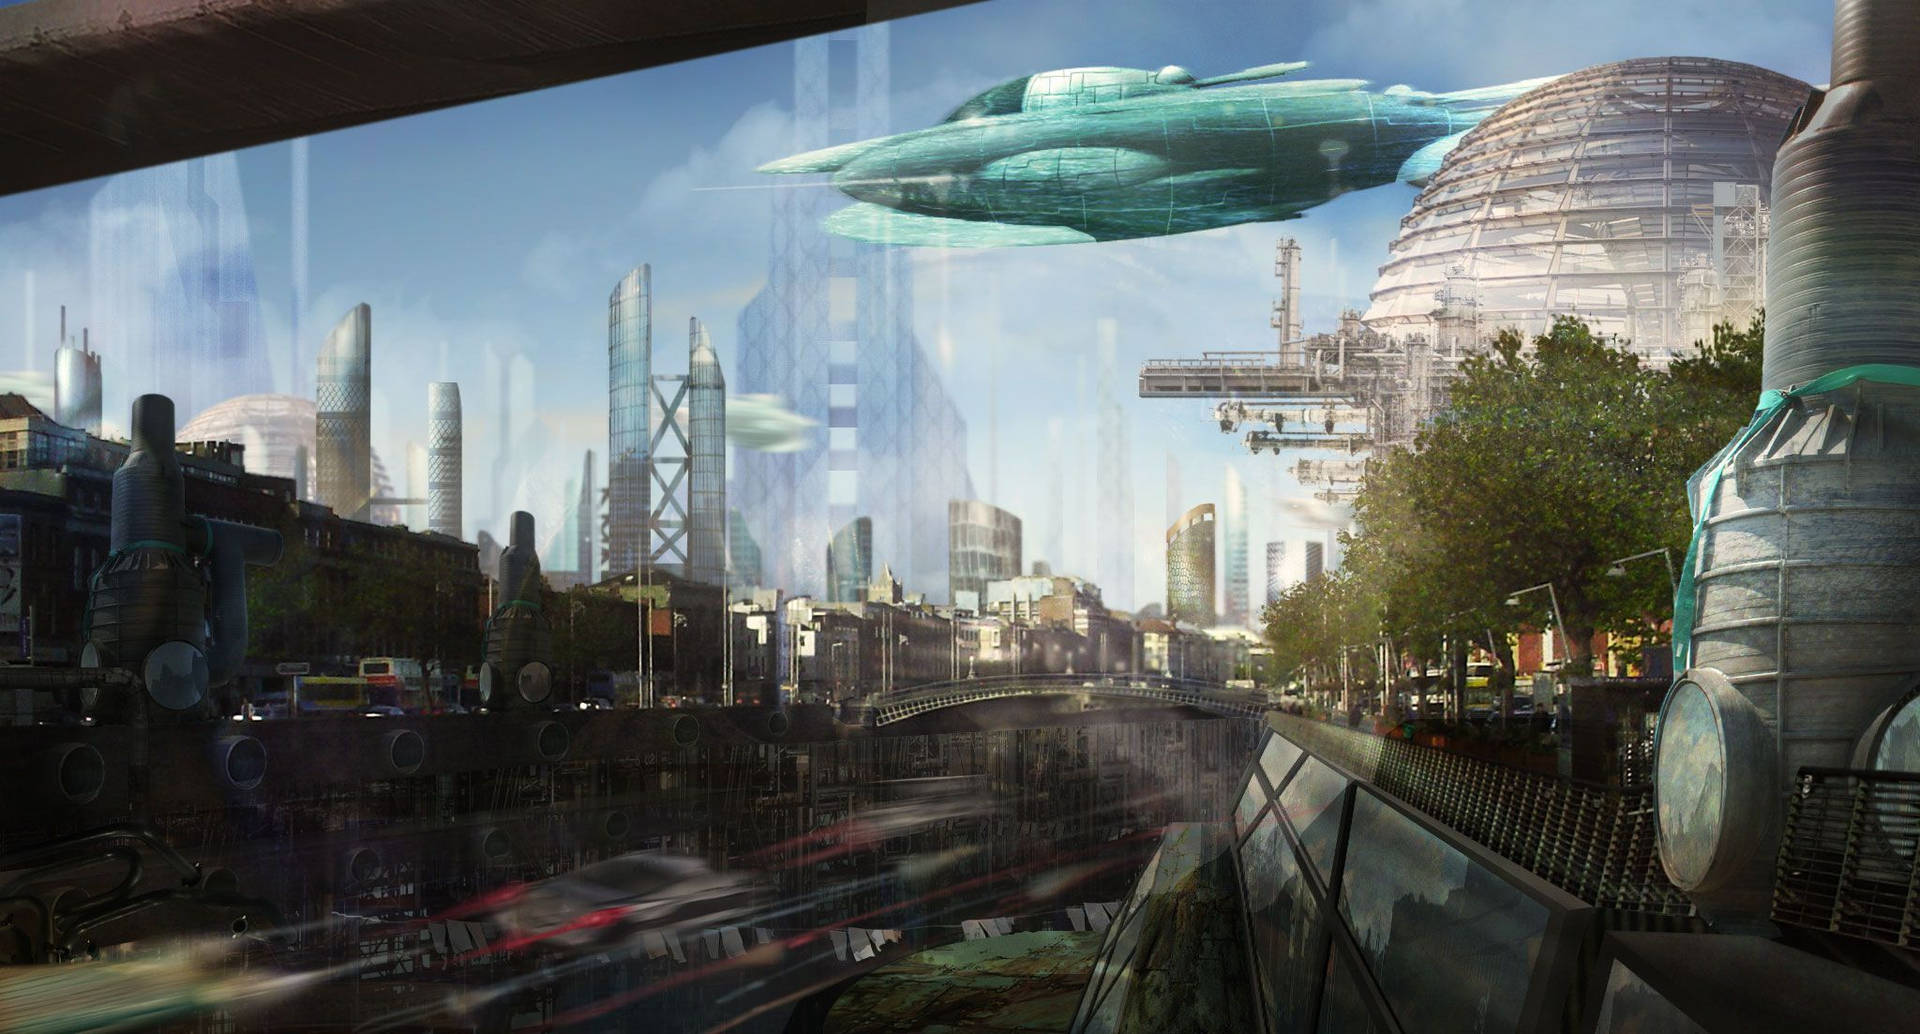 Futuristic City With Air Shuttle Background